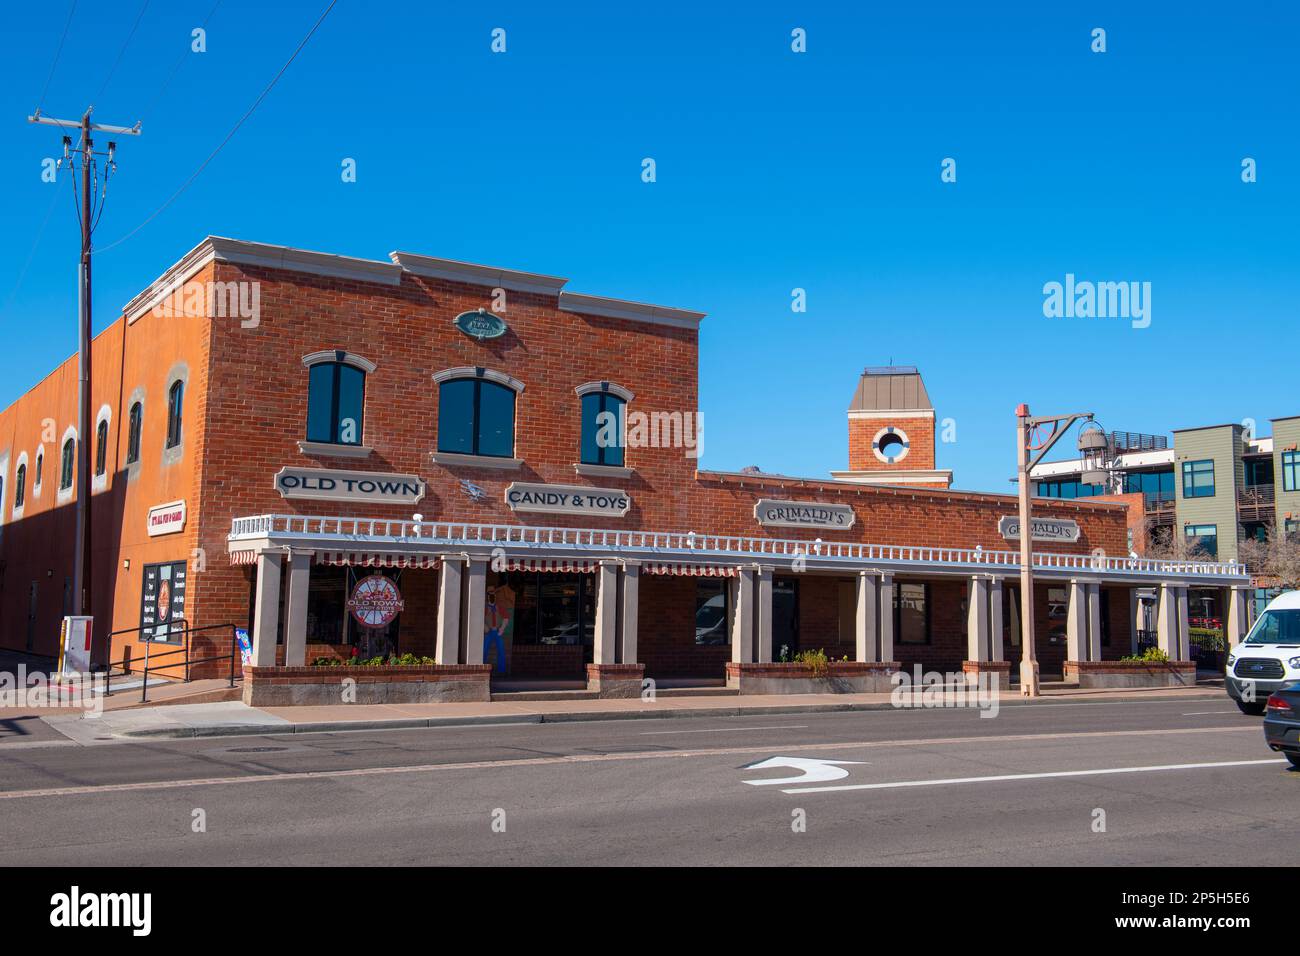 Old Town Candy and Toys at 4000 N Scottsdale Road in historic city center of Scottsdale, Arizona AZ, USA. Stock Photo